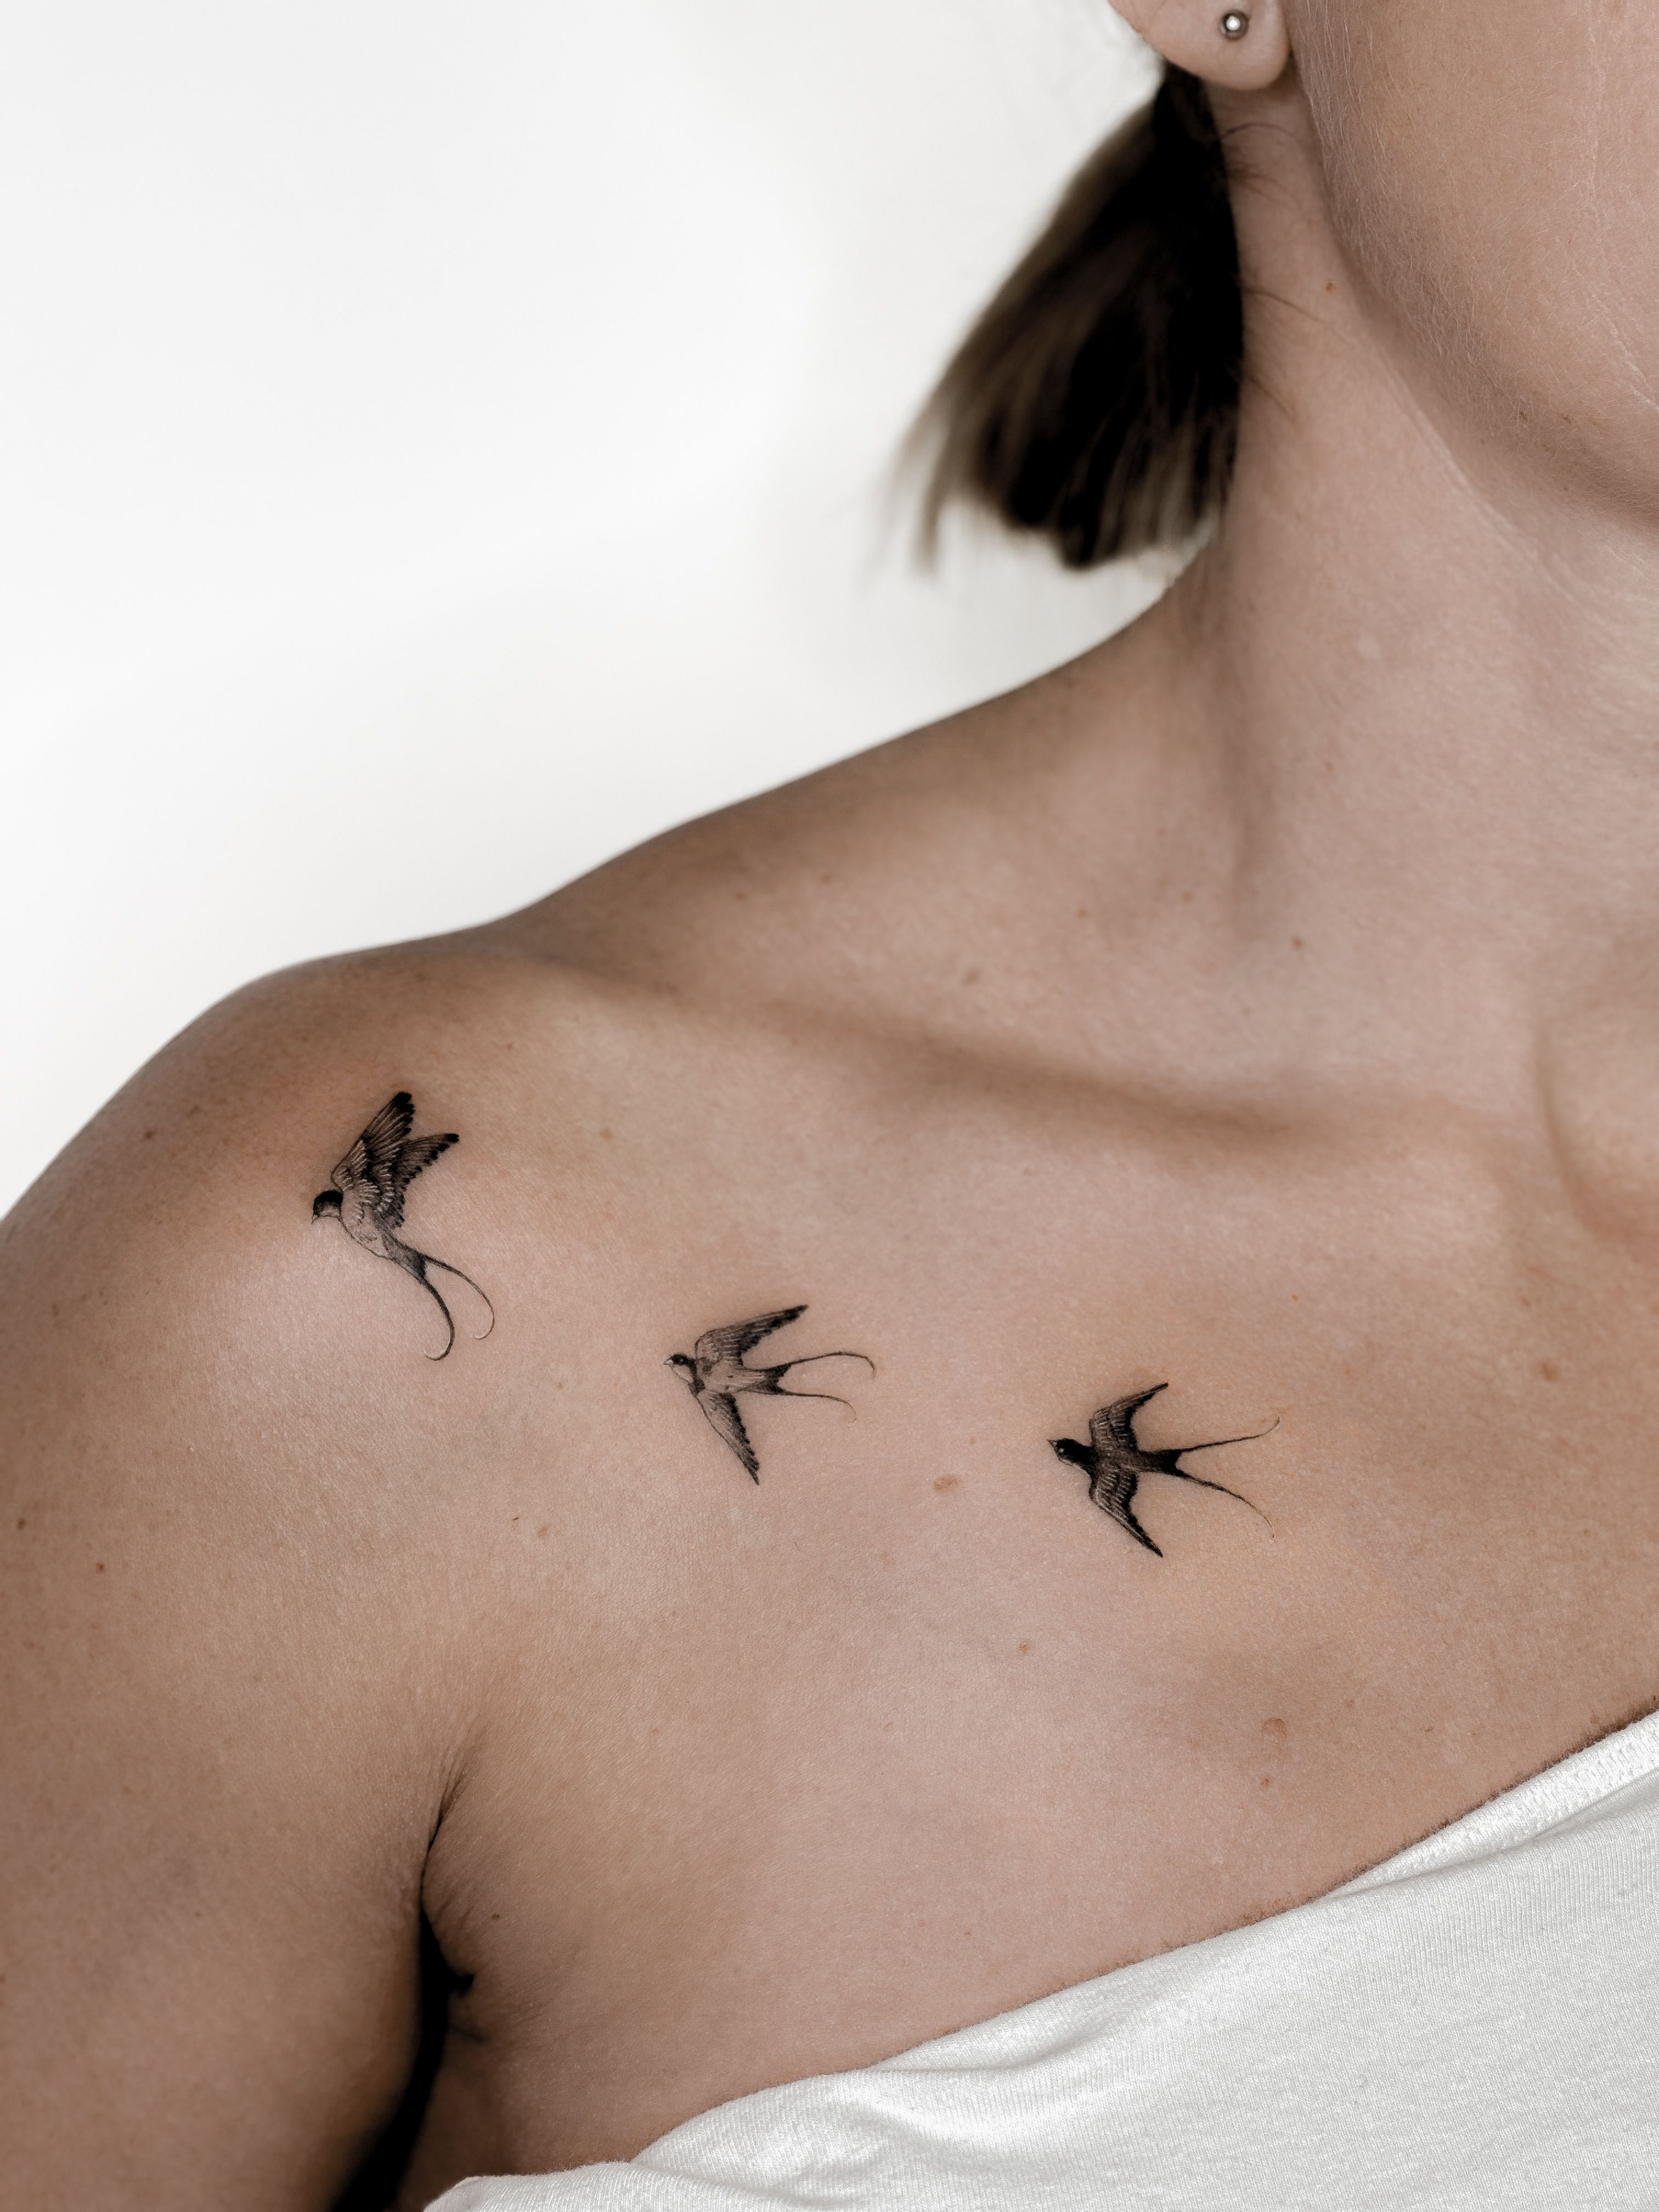 100 Small Bird Tattoos Design Ideas with Intricate Images | Bird tattoos  arm, Small tattoos for guys, Arm tattoos for guys